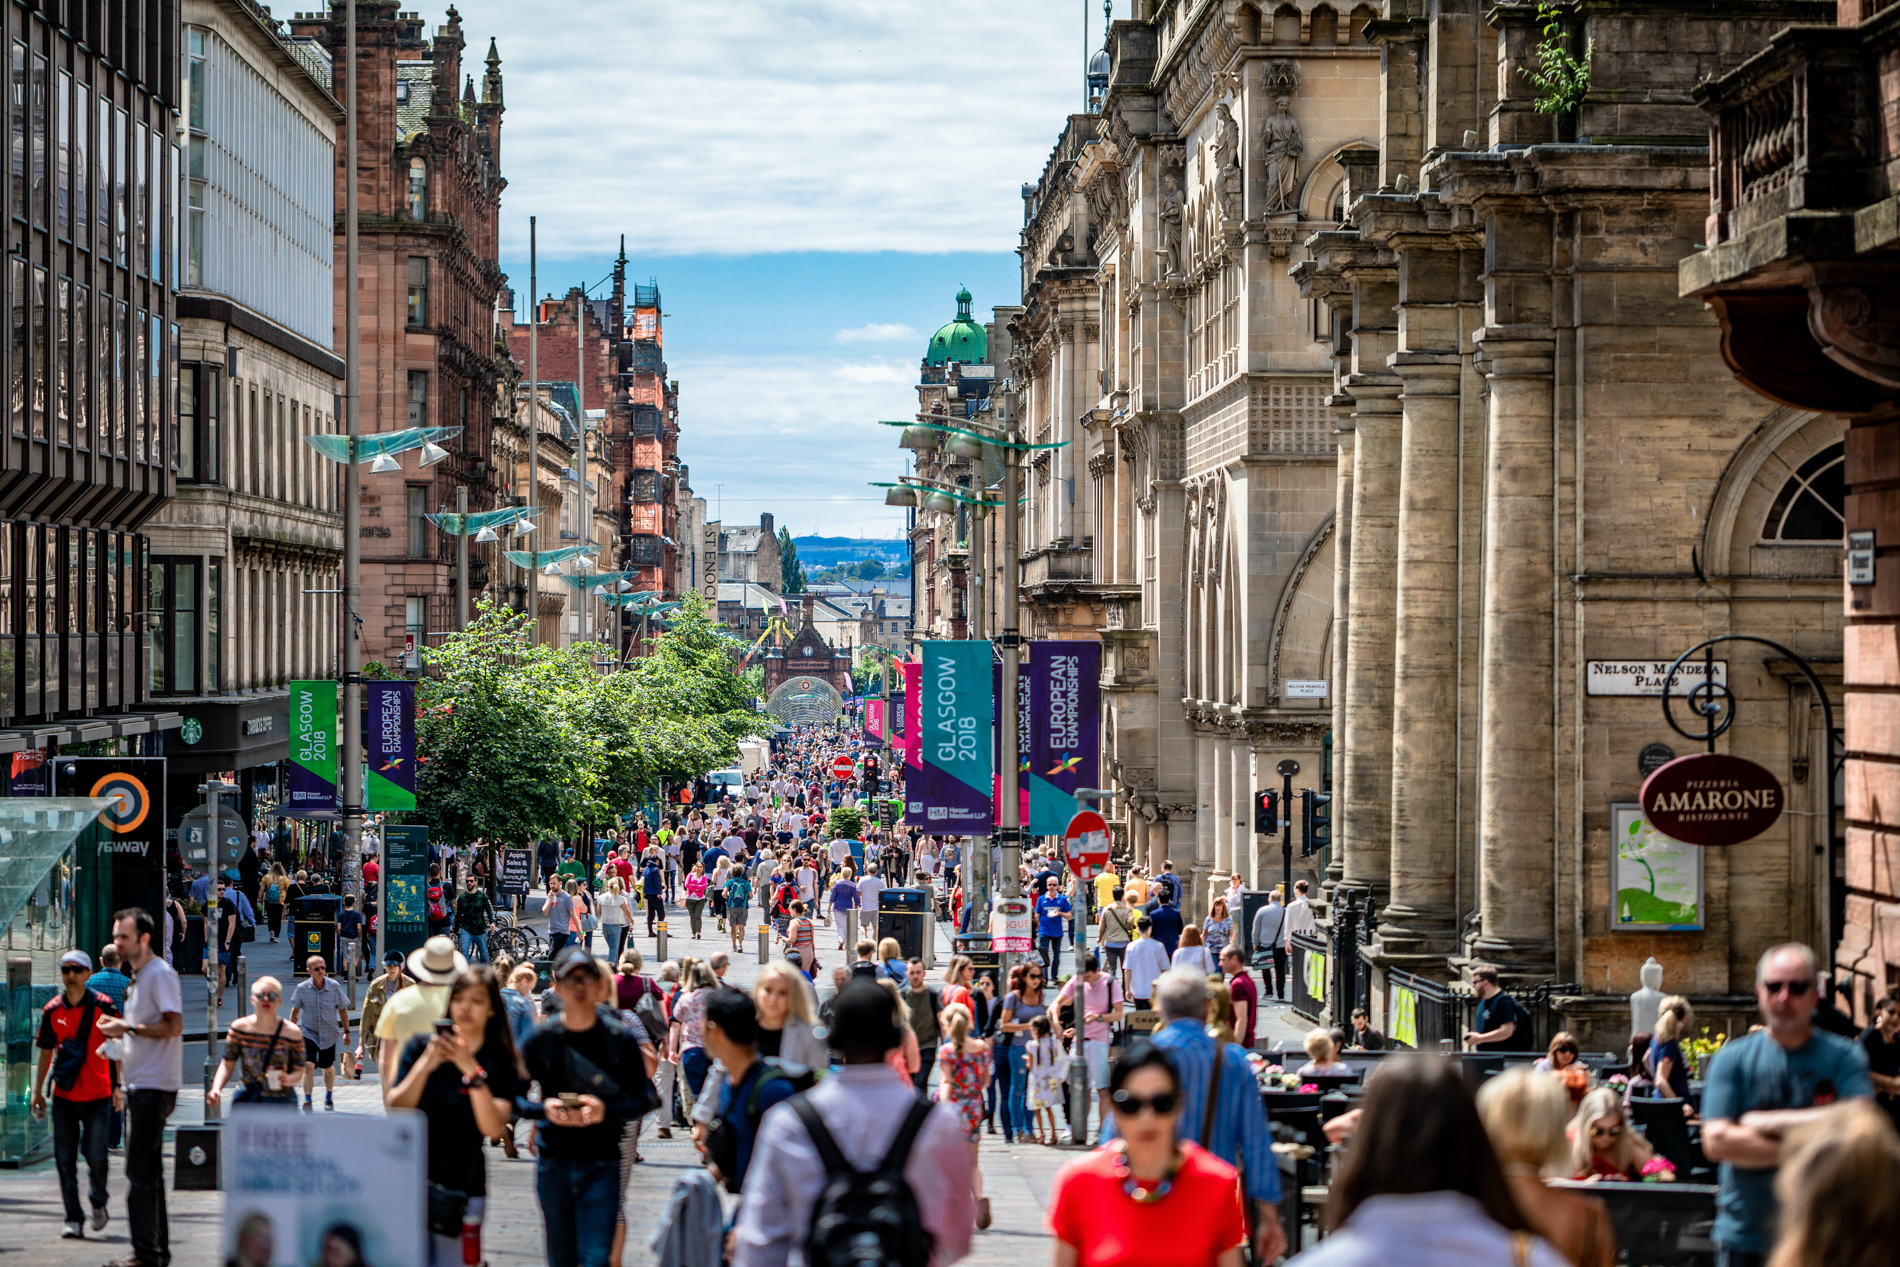 Glasgow, Scotland: Day two of your 7 day Scotland itinerary